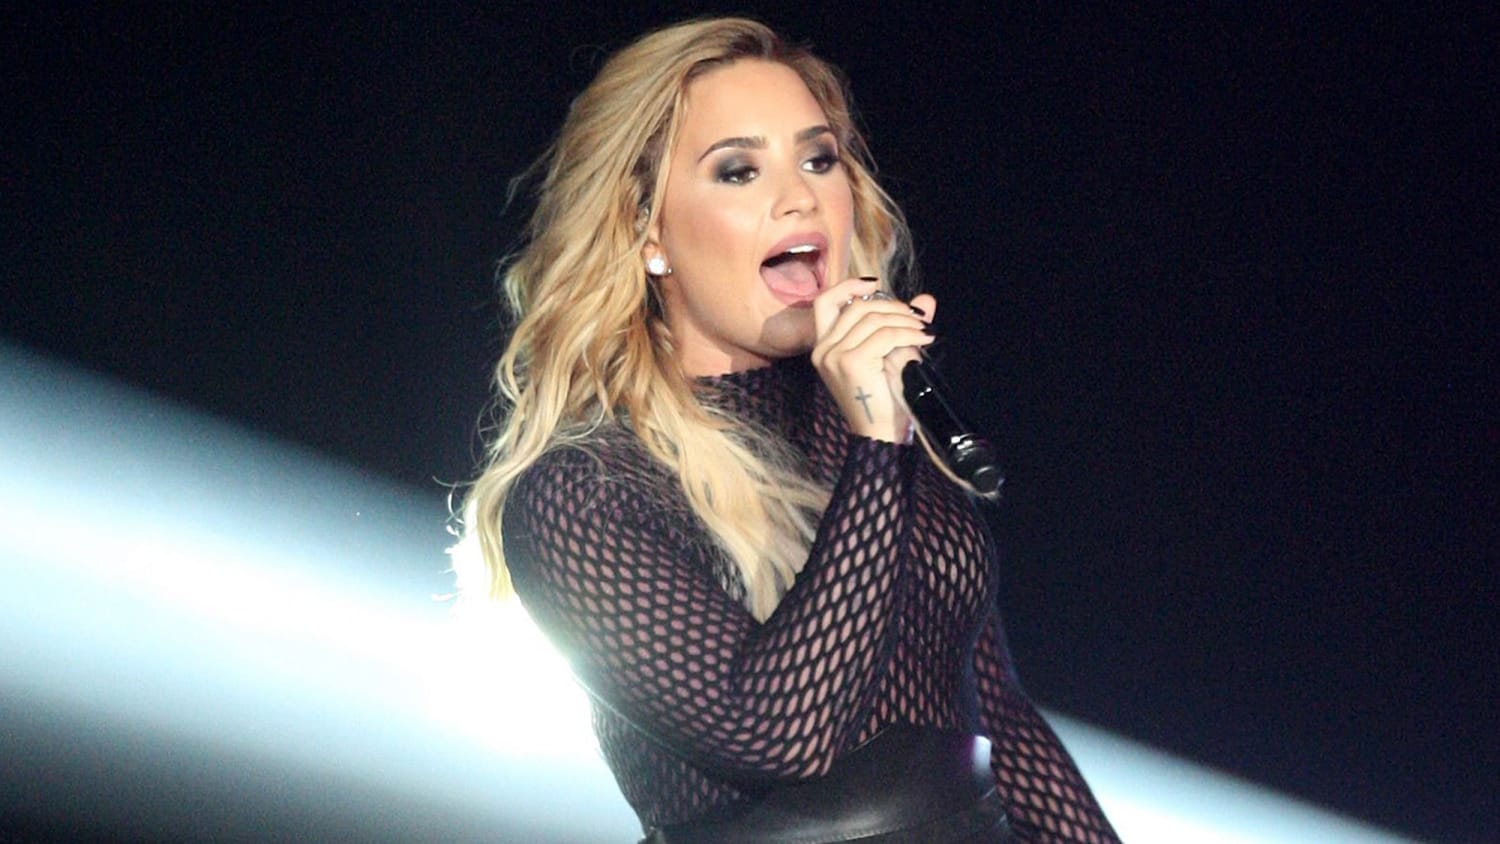 Demi Lovato is back as a brunette after a whole week as a blonde